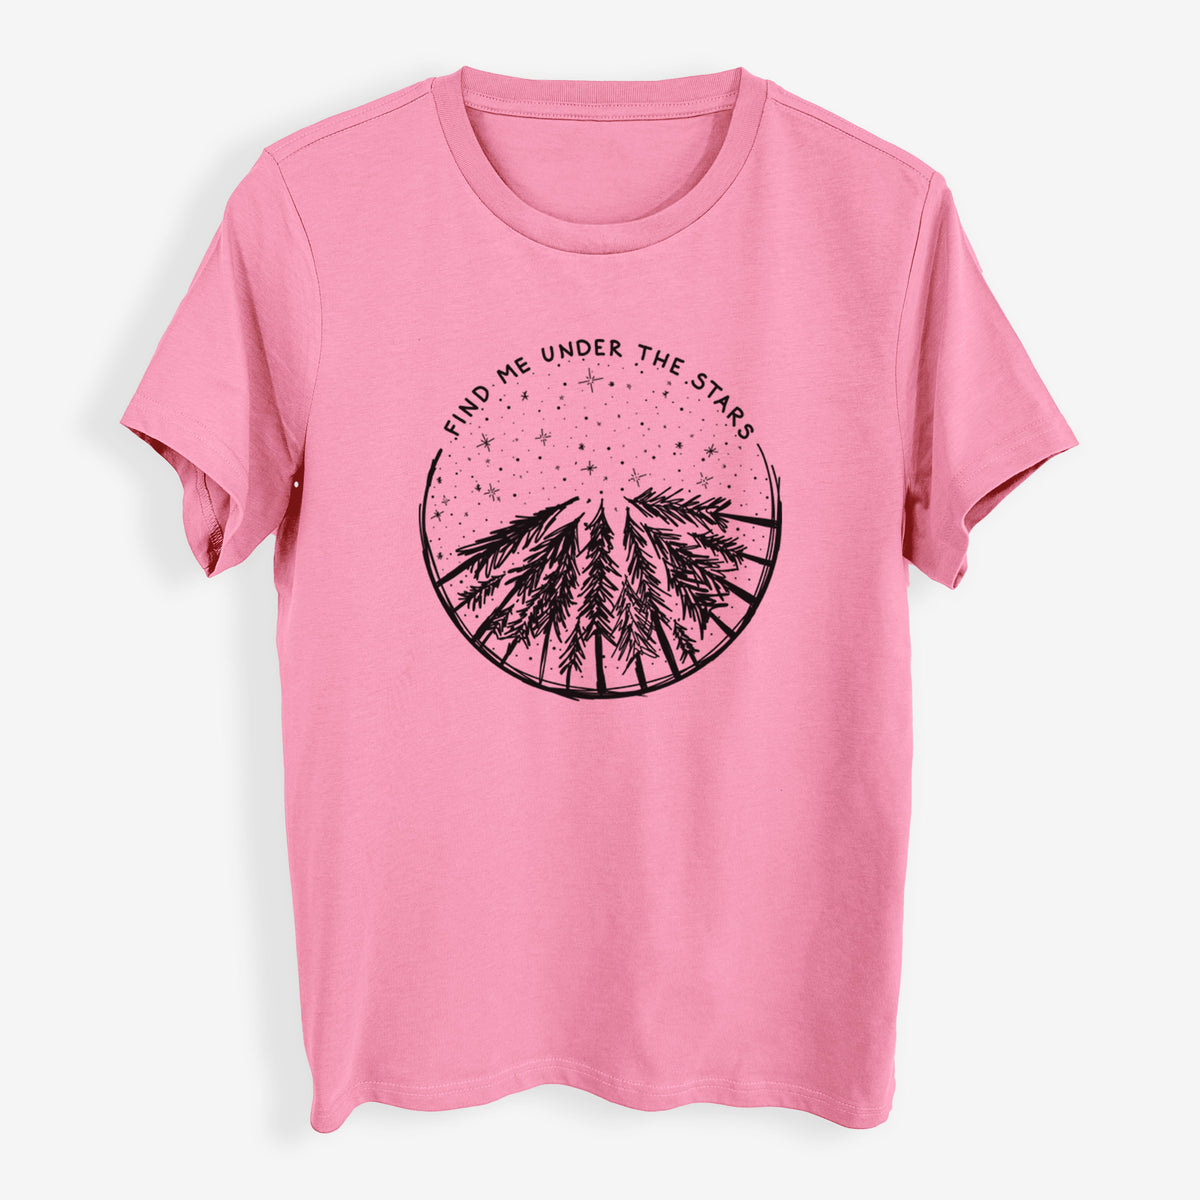 Find Me Under the Stars - Womens Everyday Maple Tee